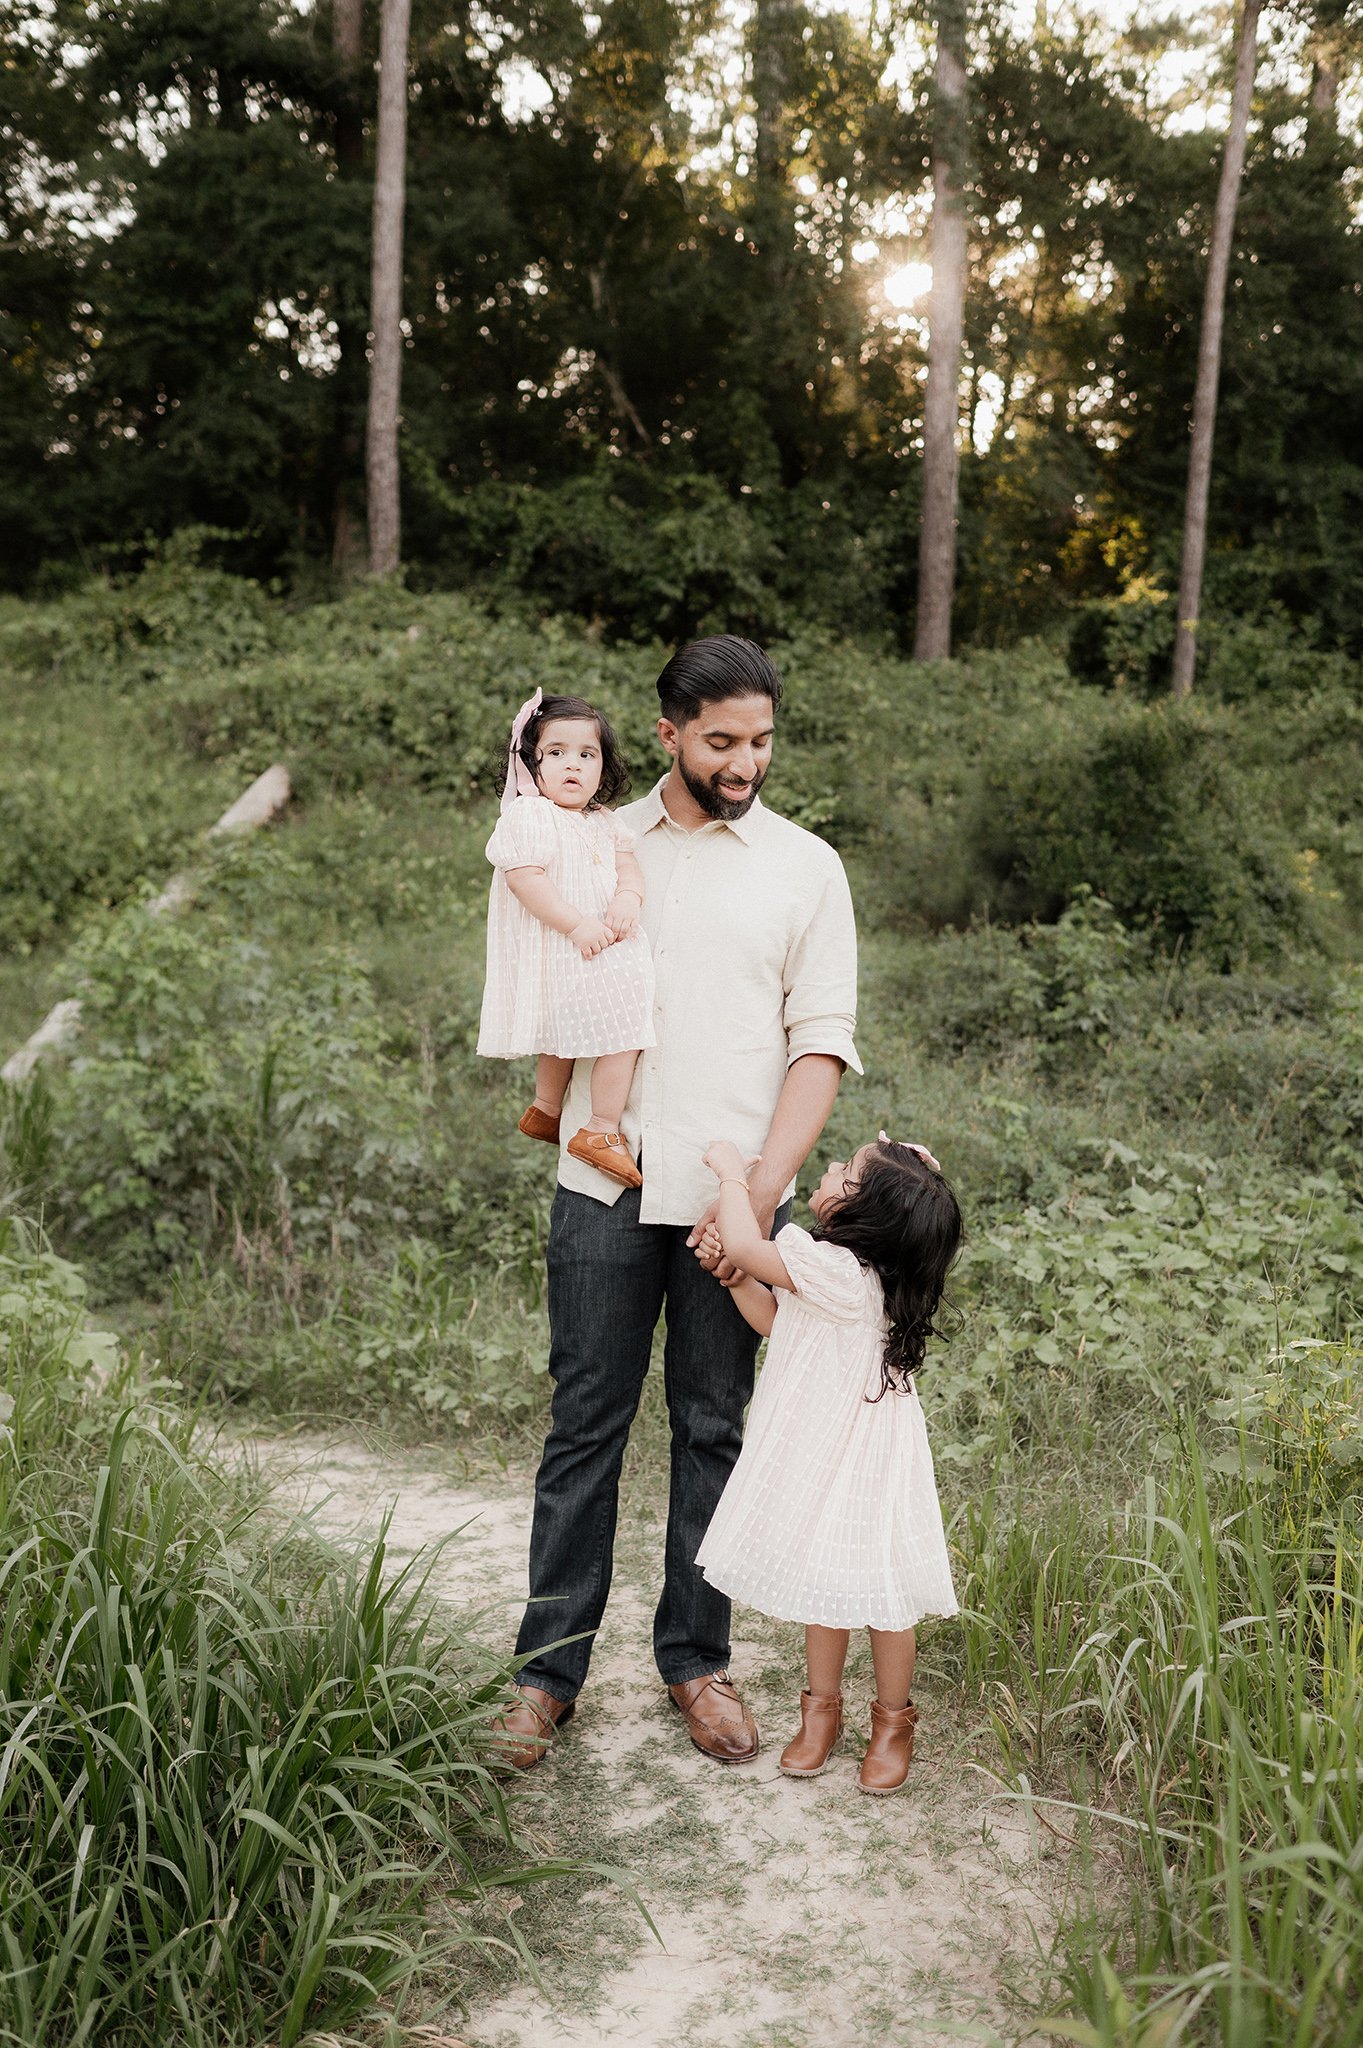 the woodlands family photographer _ conroe photographer _ houston family photographer _ ashley gillen photography _ texas family photographer _ conroe wedding photographer _ conroe texas _ cshi9.jpg